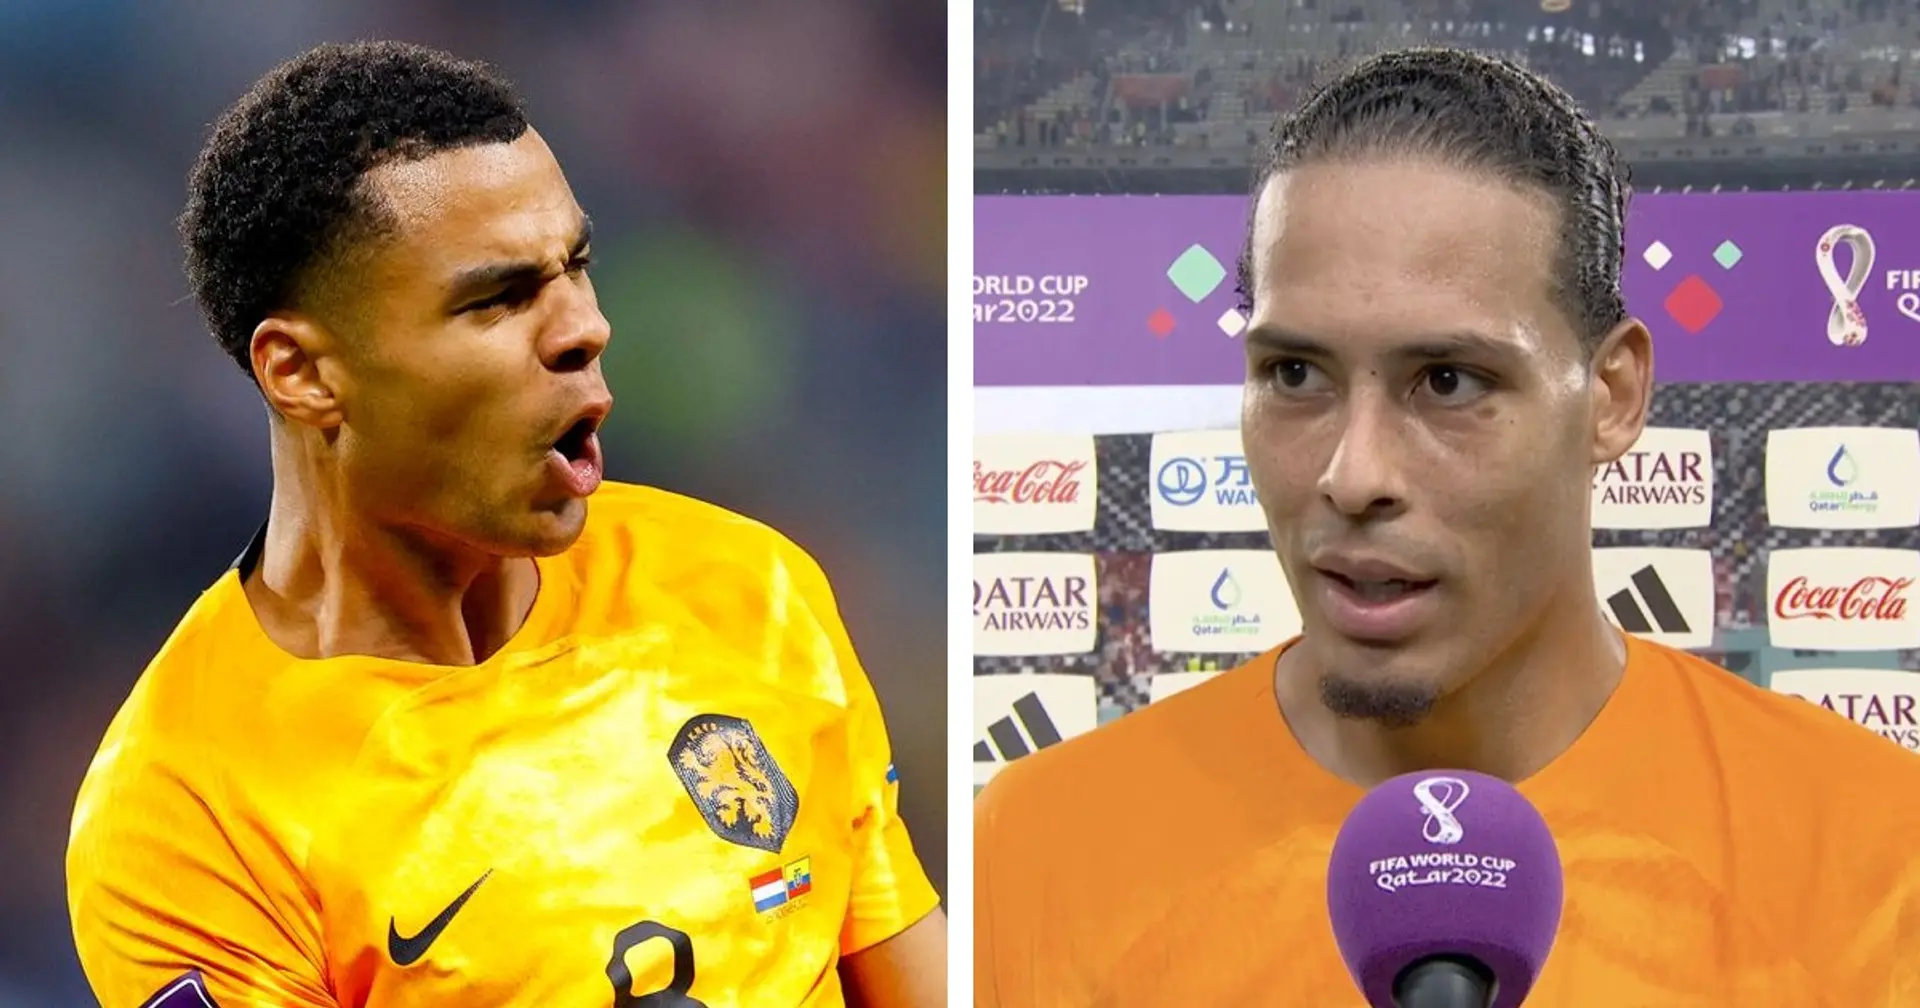 'Are they at the same level?': Van Dijk aims dig at Man United over Gakpo interest